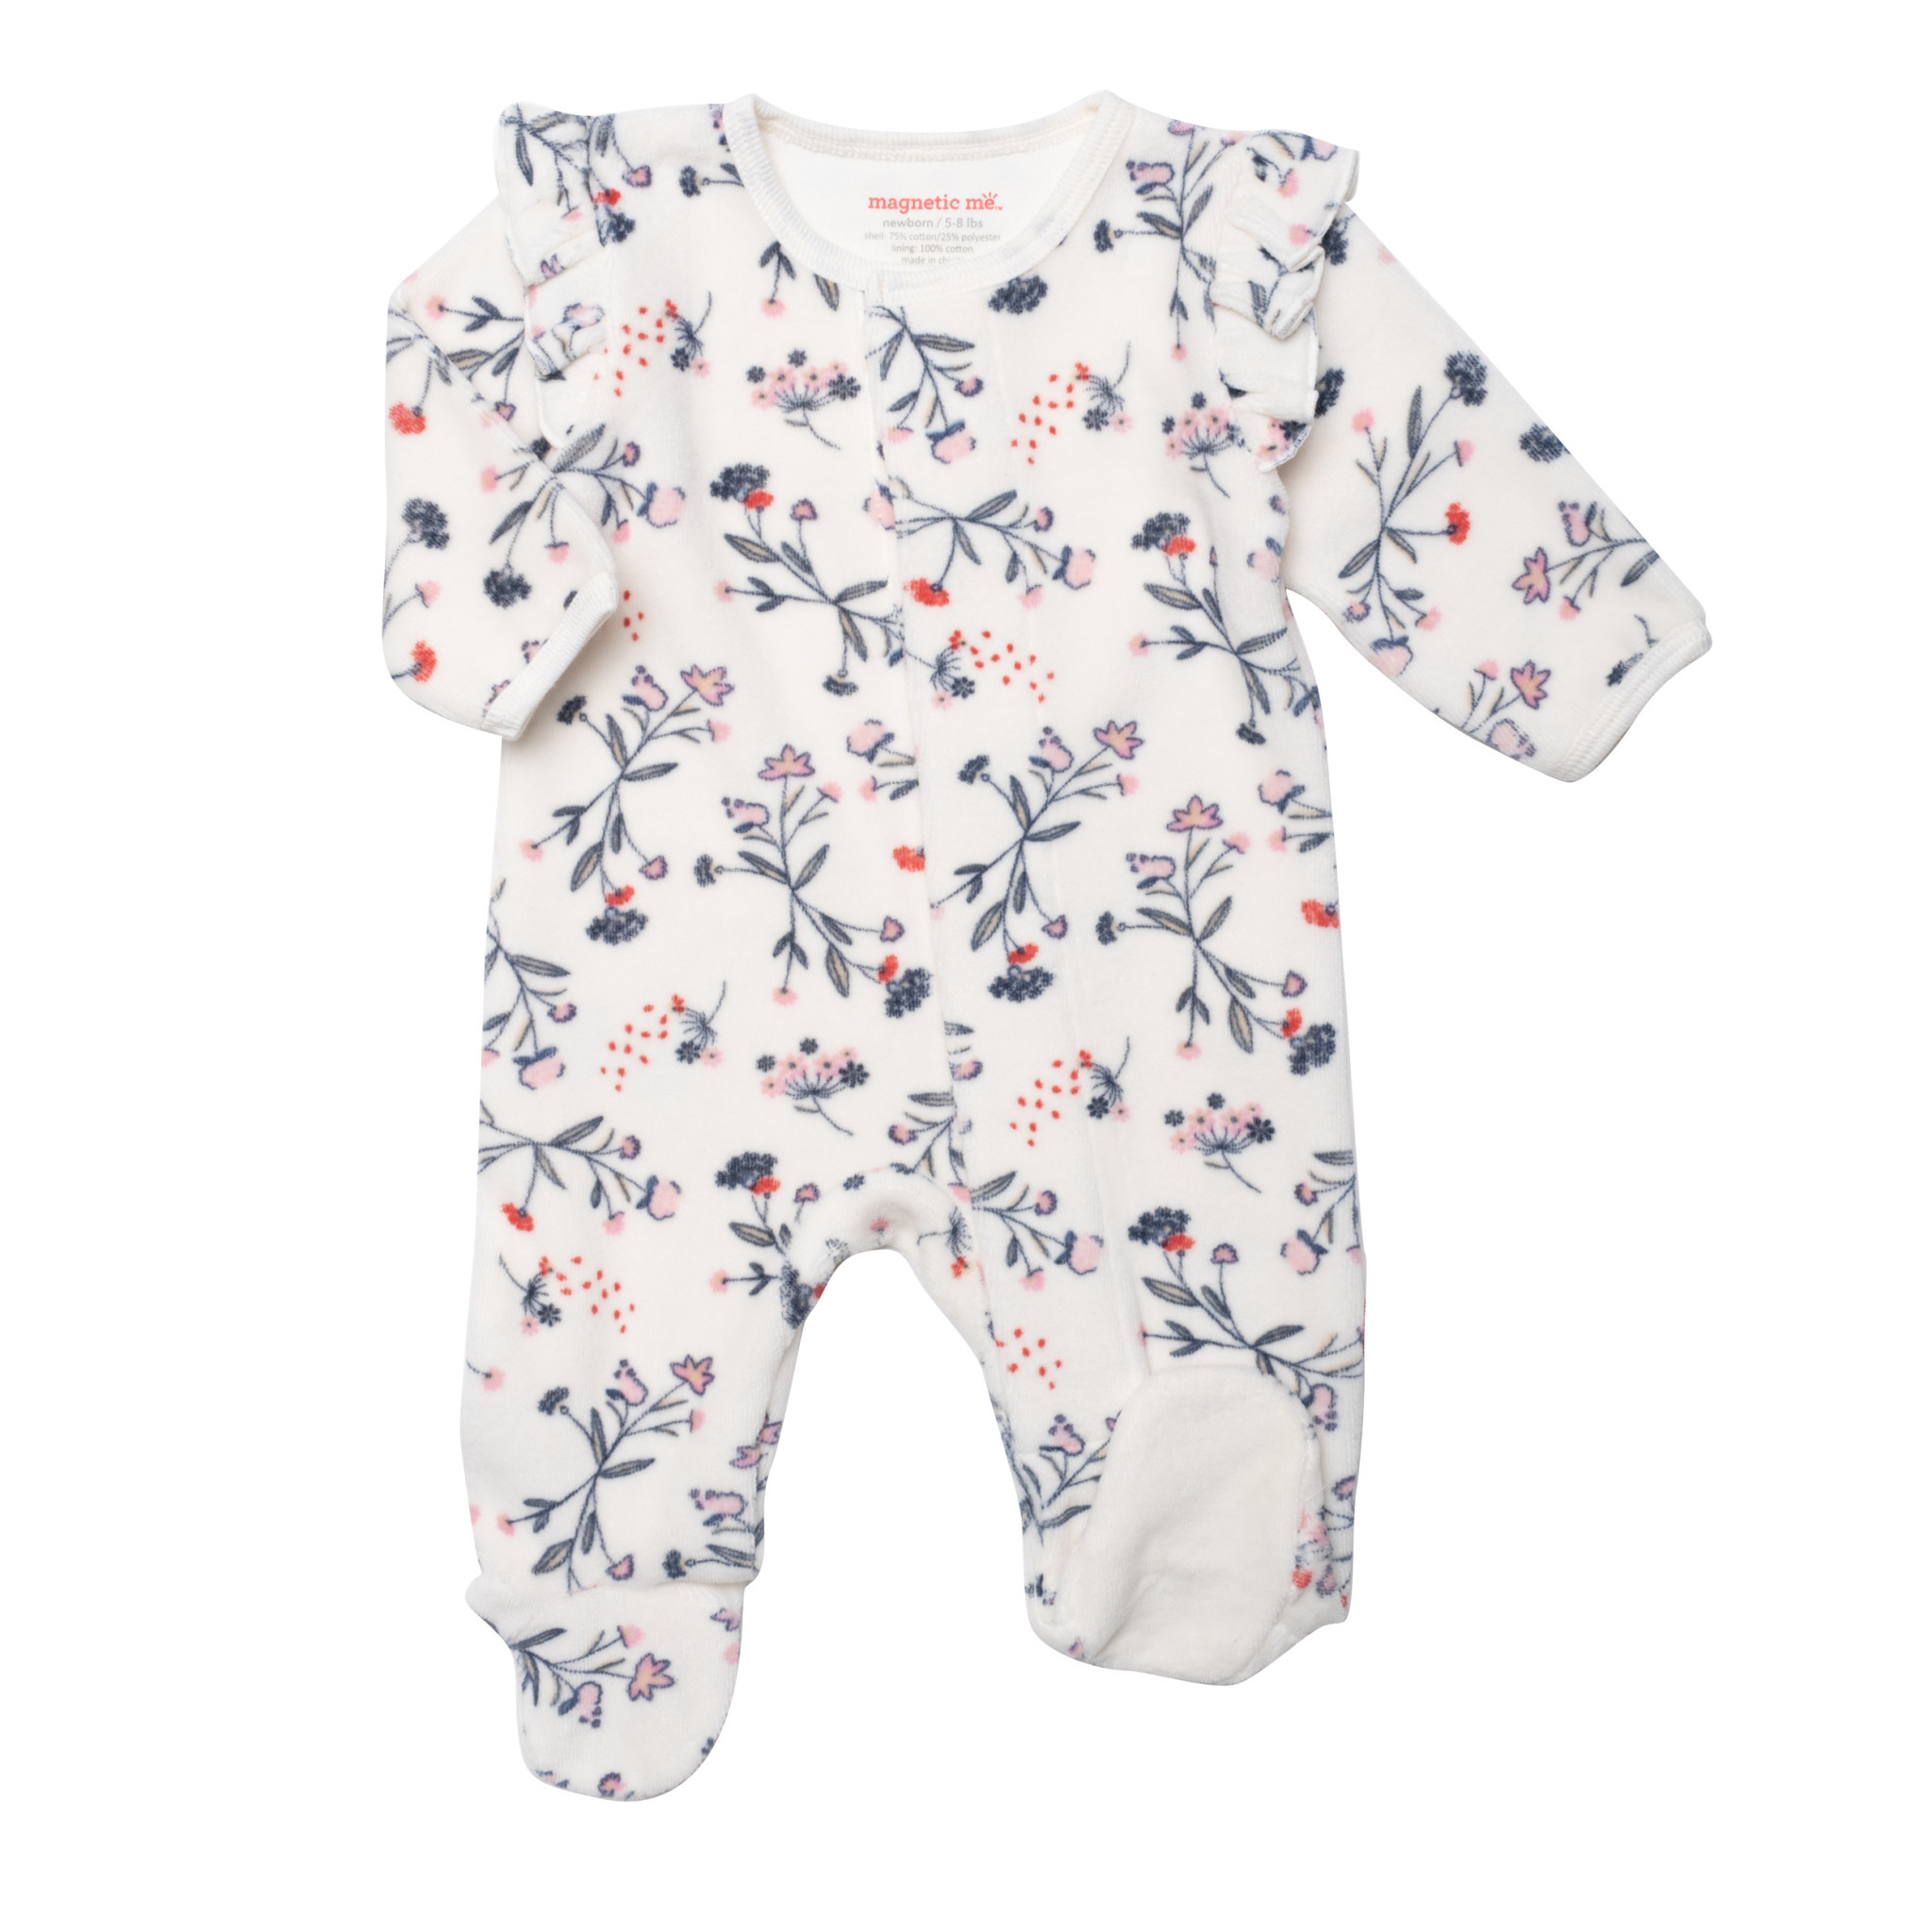 Magnificent Baby Magnetic Me Autumn Velour Magnetic Footie